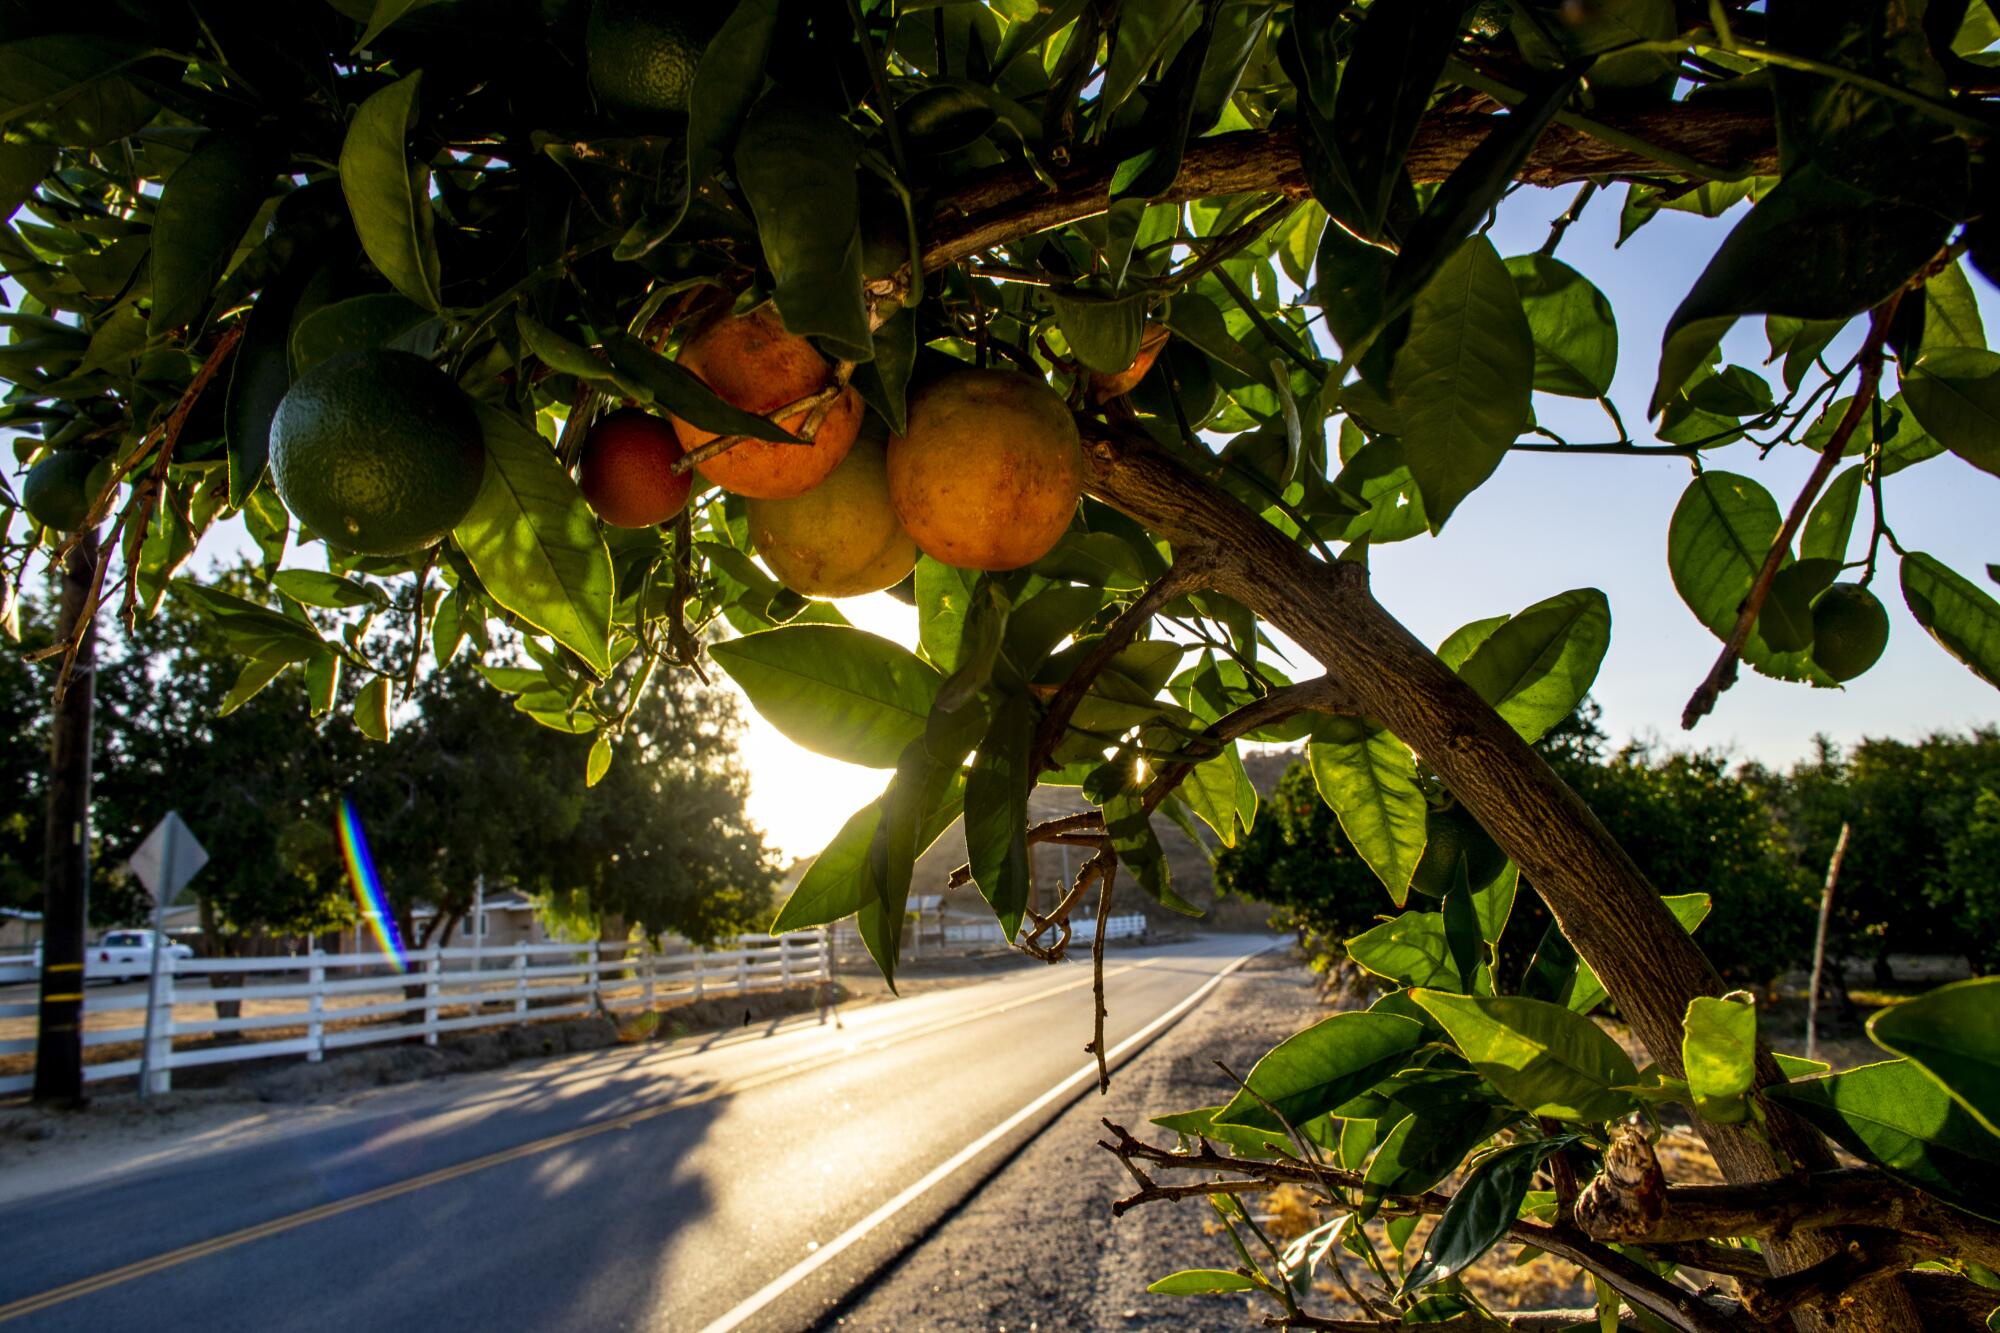 Oranges weighing down a branch next to a two-lane road